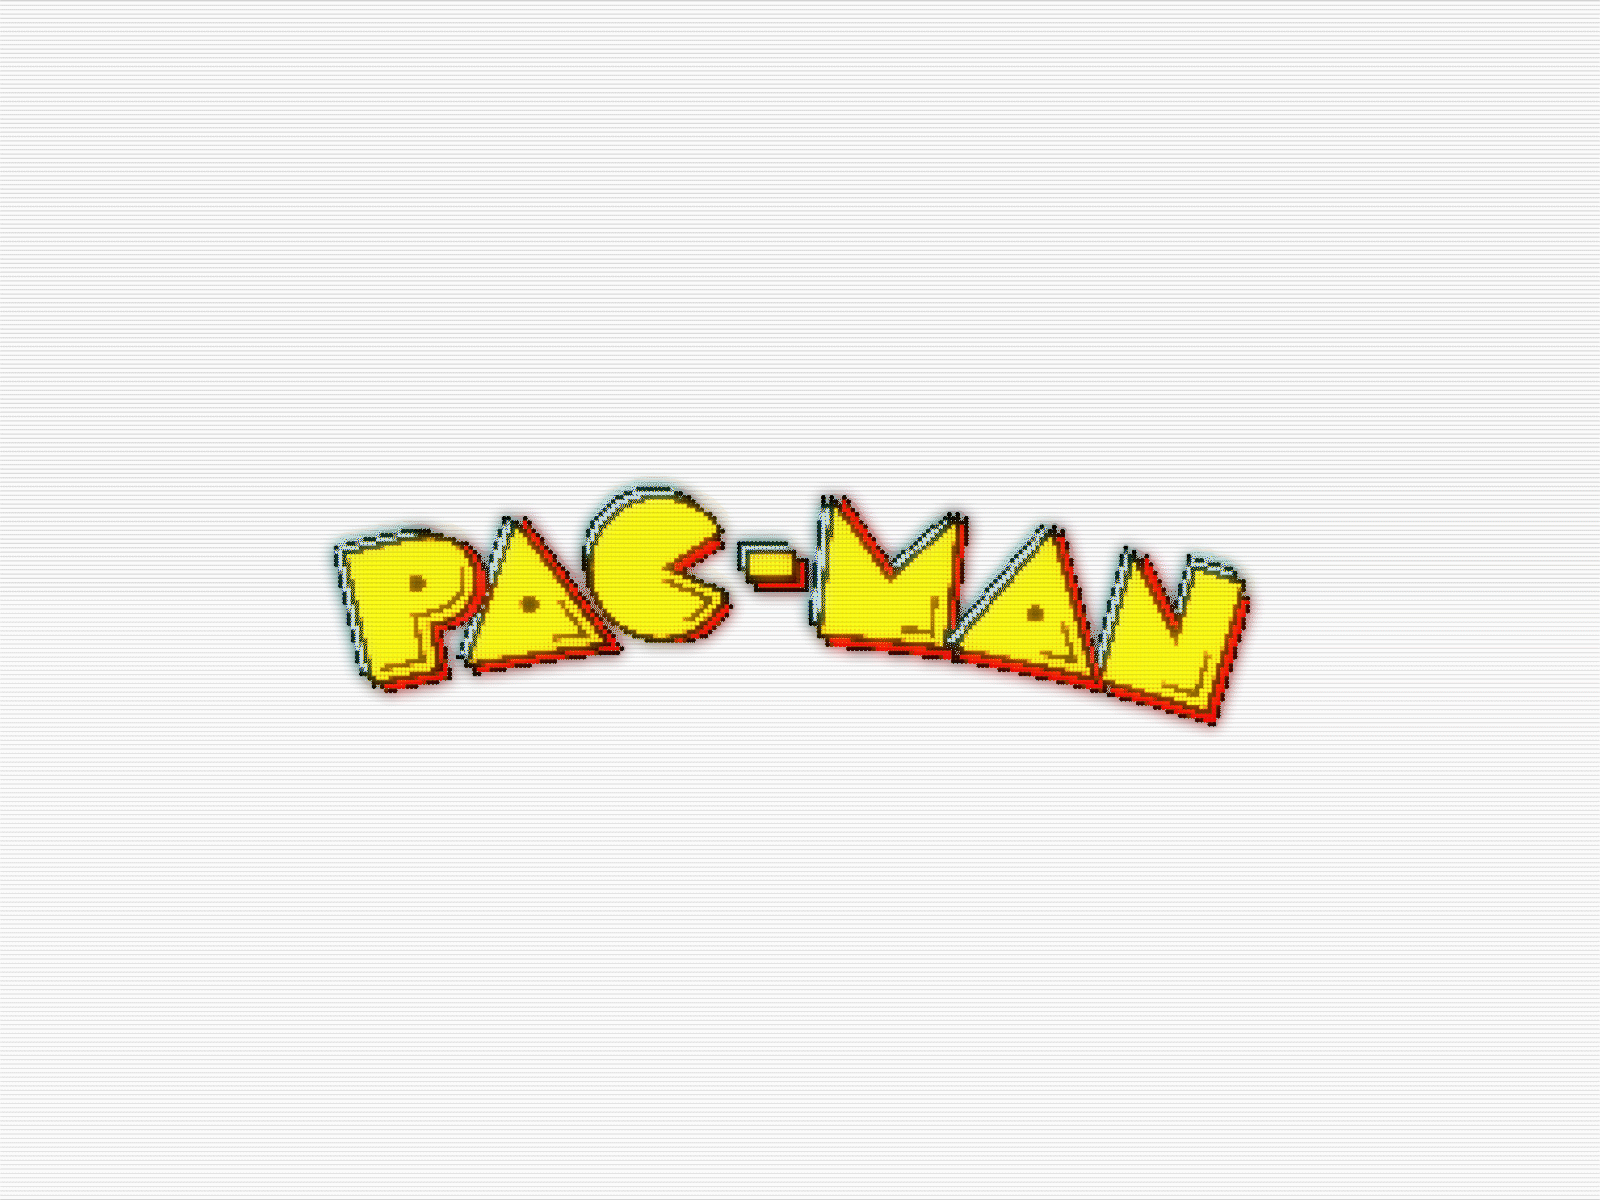 PAC-MAN after effects animation games gif logo motion pacman pixel retro scanlines